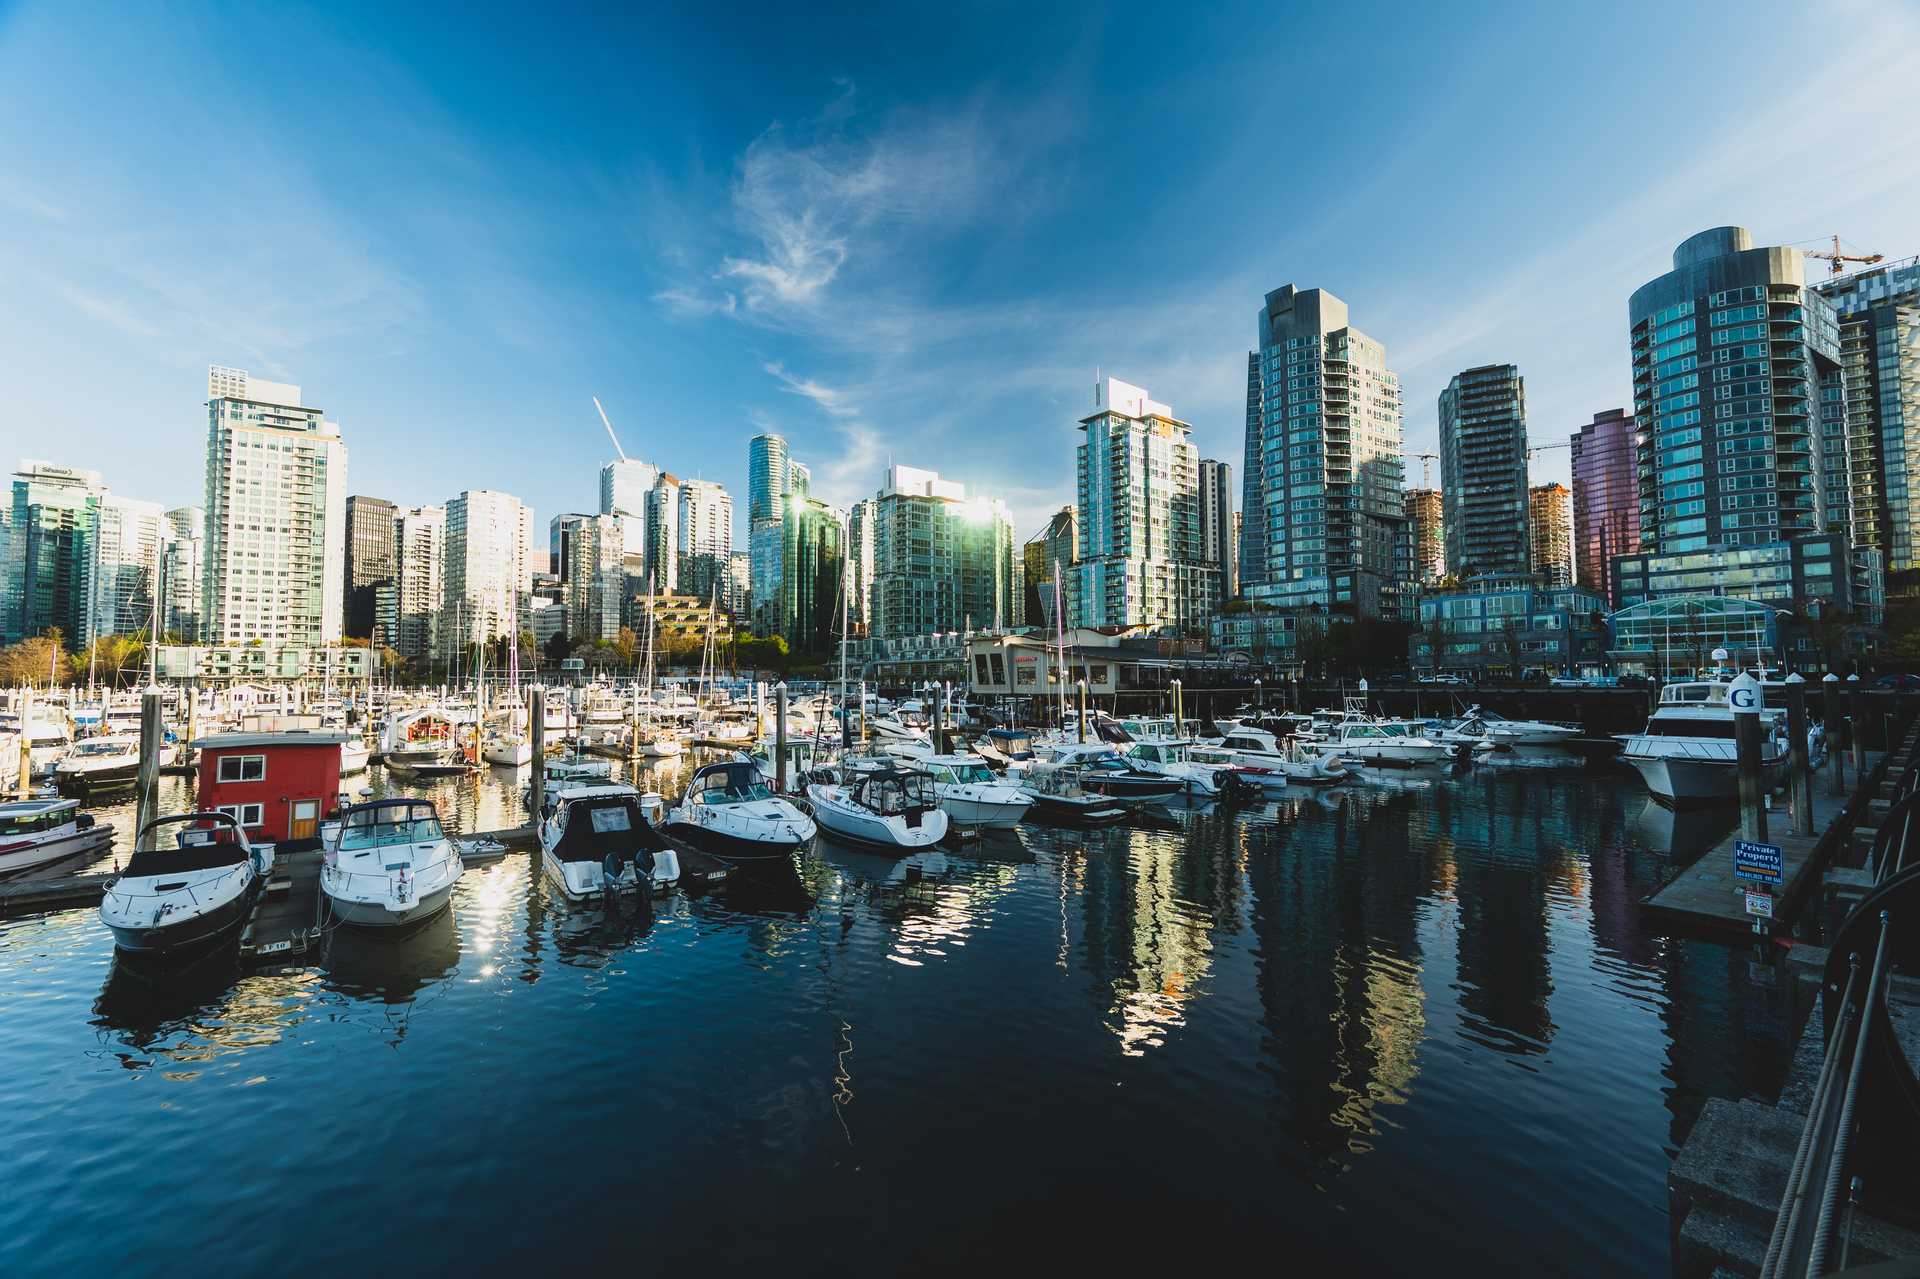 boats in the coal harbour marina